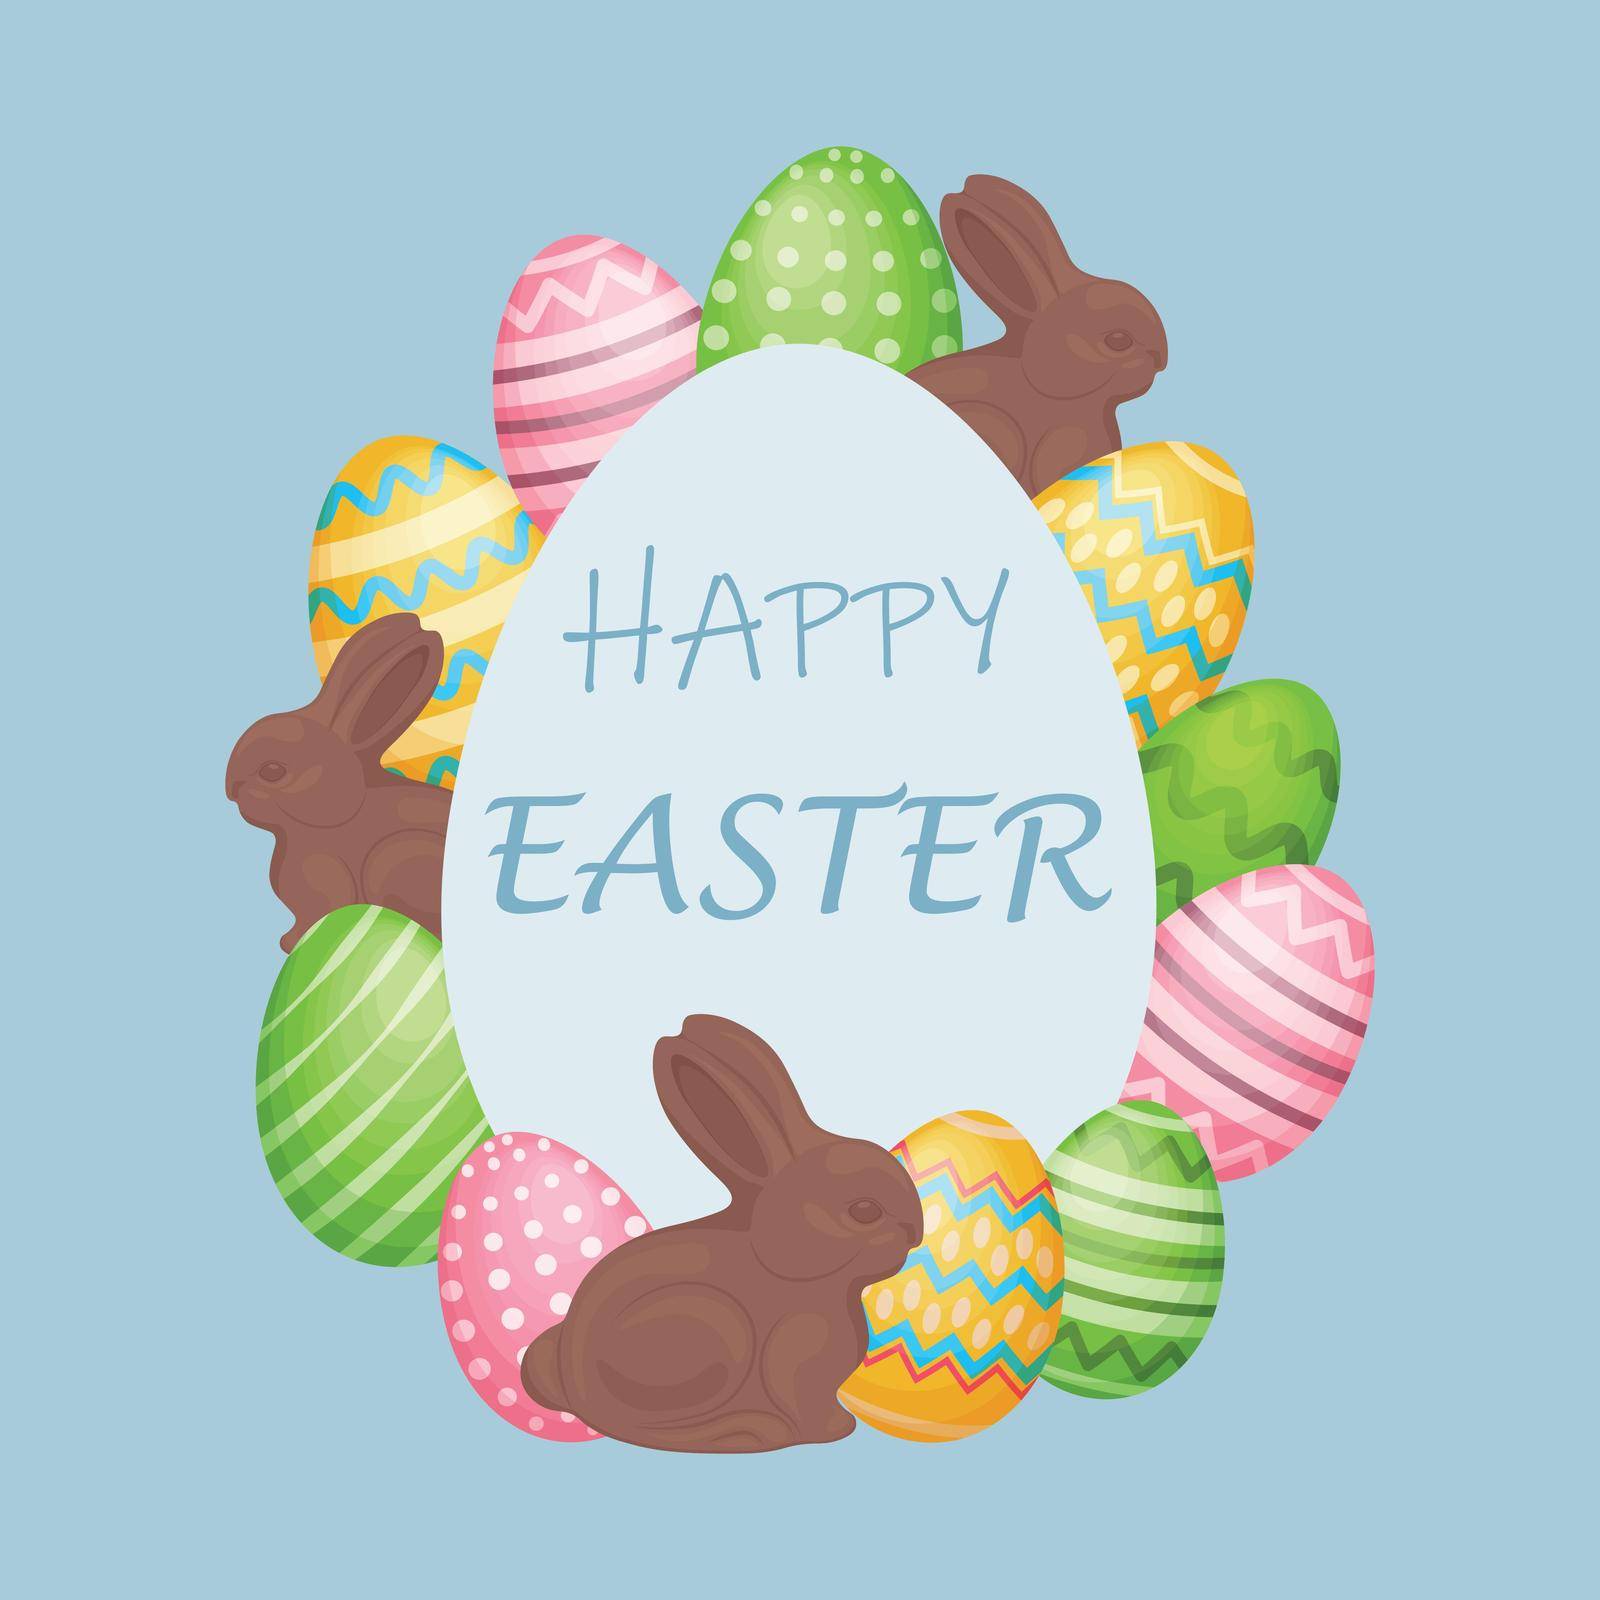 Happy Easter. Greeting card with an image of an Easter bunny and colored Easter eggs on a blue background. Vector illustration.